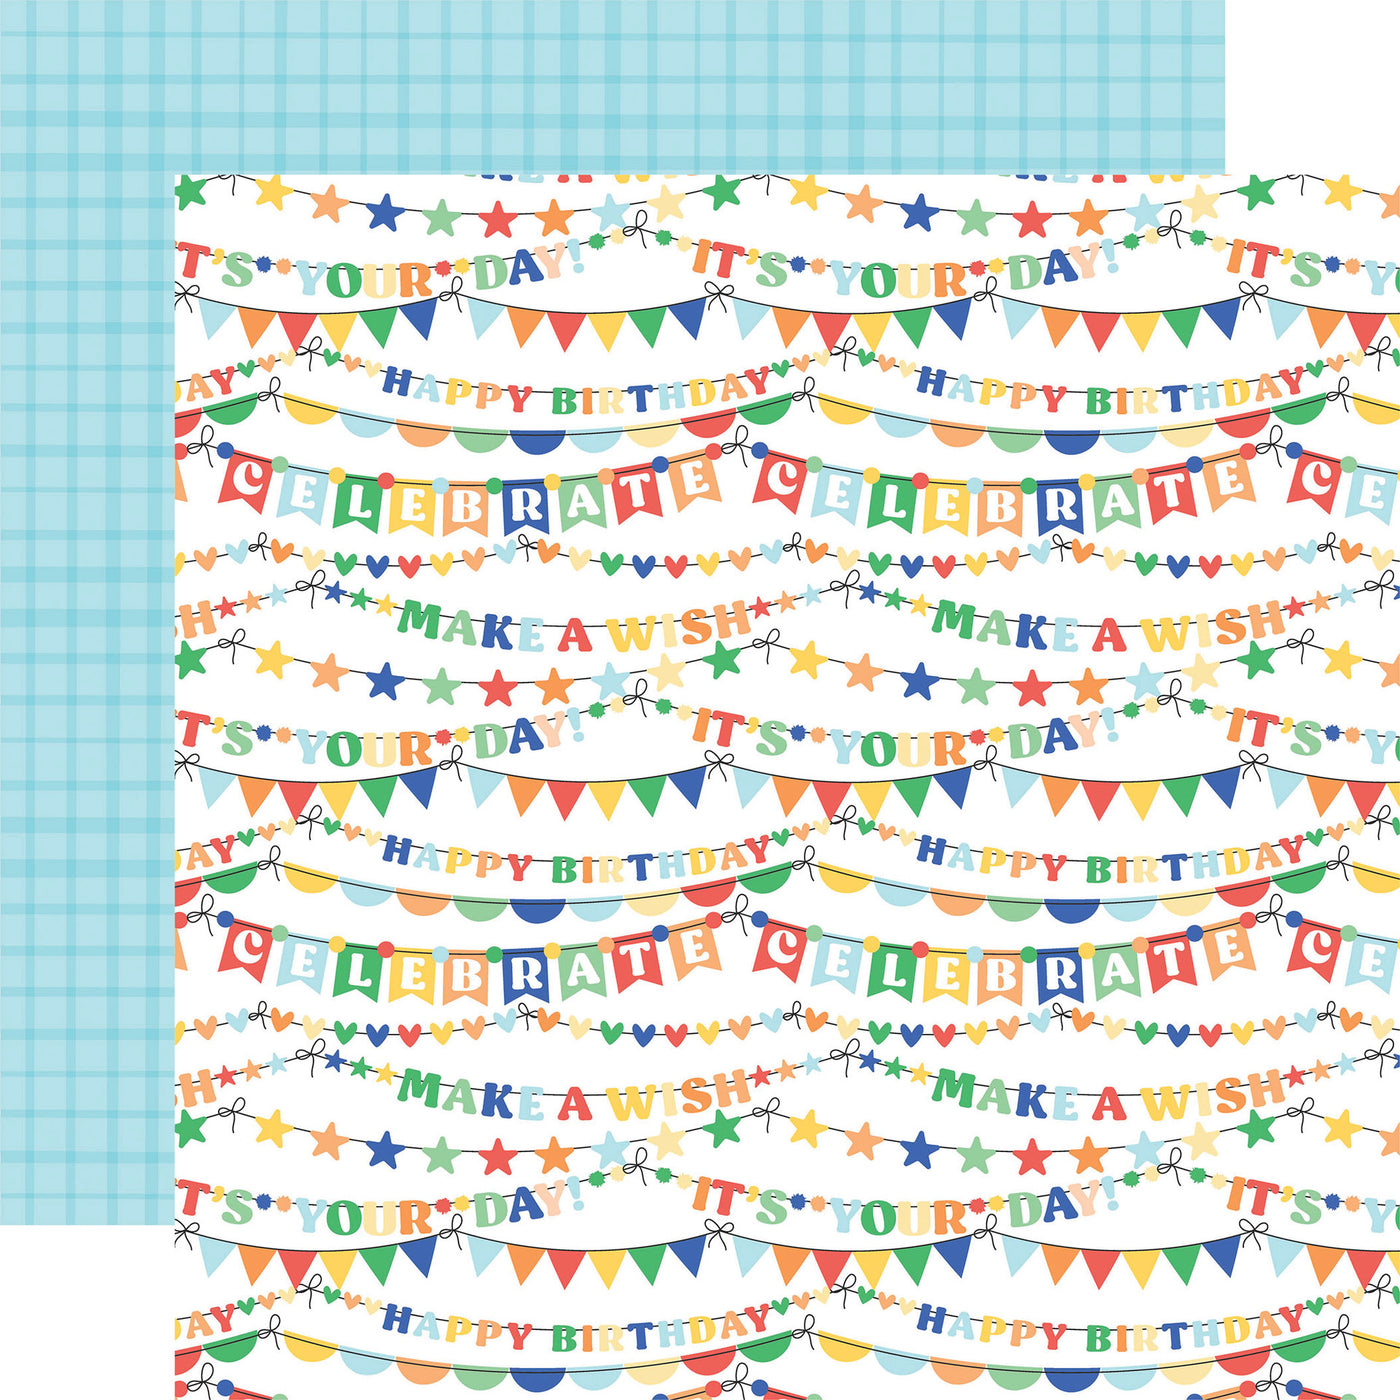 12x12 double-sided multi-colored patterned paper from Echo Park Paper (colorful birthday banners on a white background, blue plaid on a baby blue background reverse)